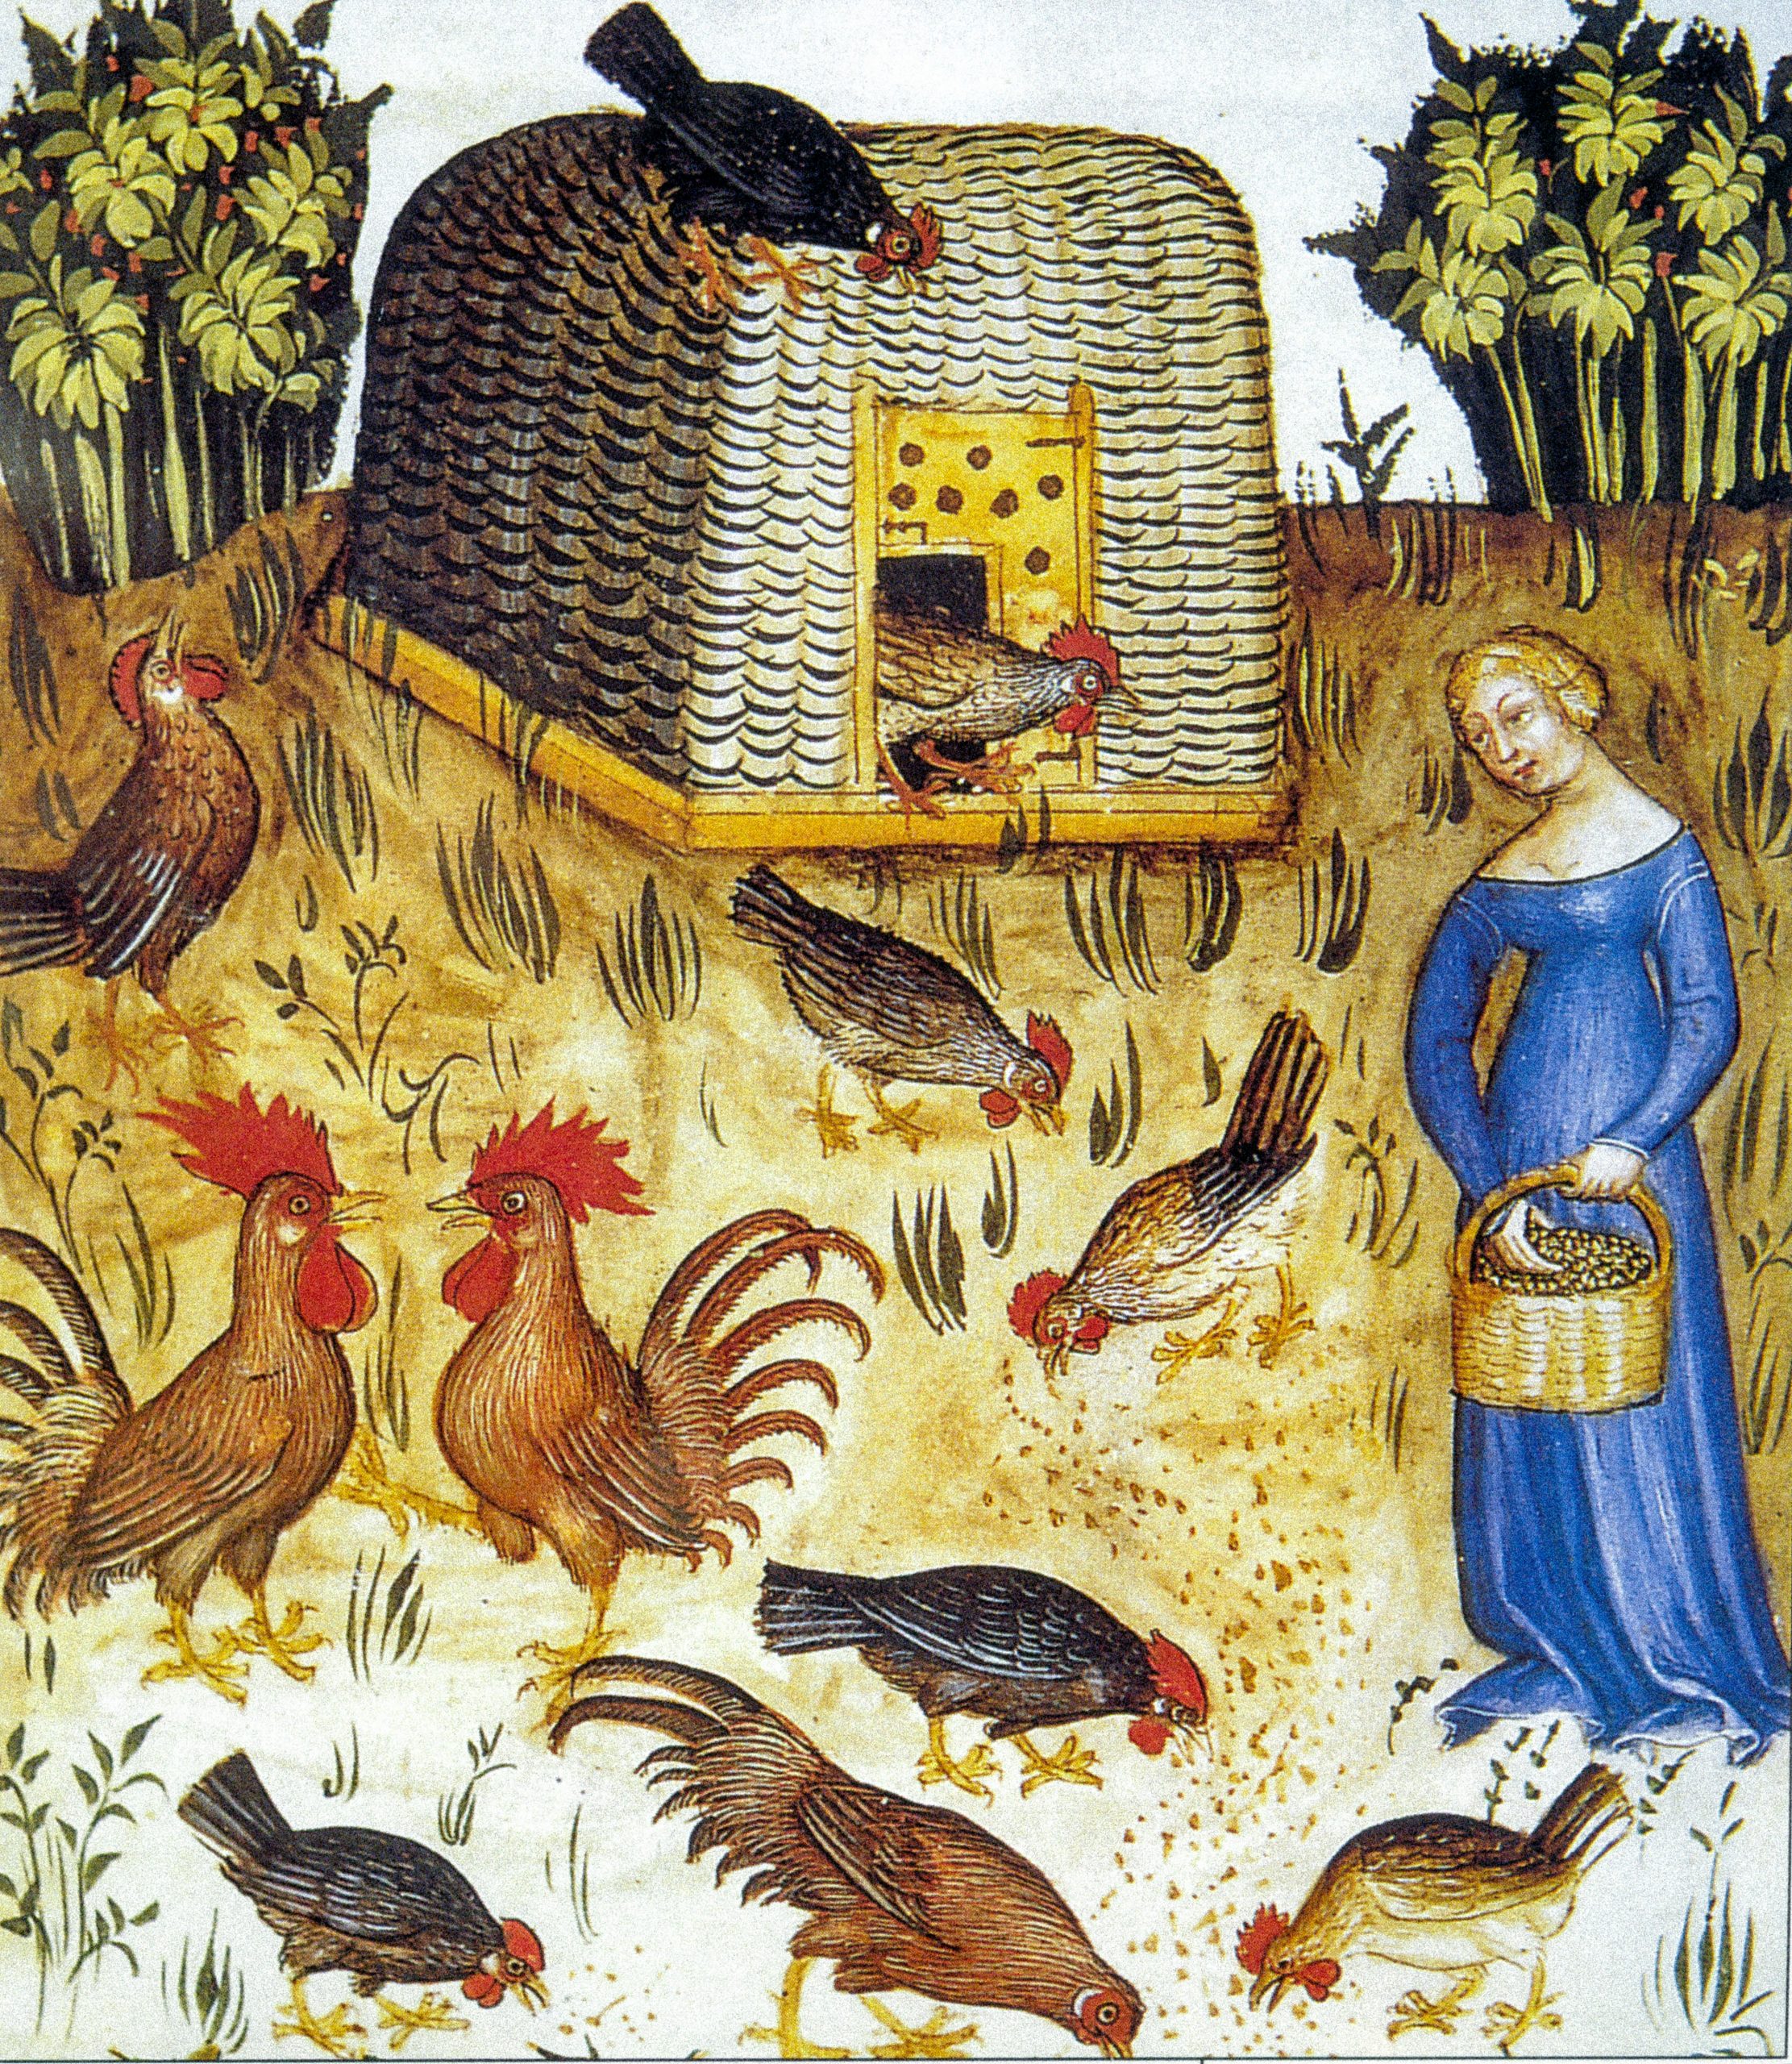 Farm animals, chickens, roosters in a medieval miniature